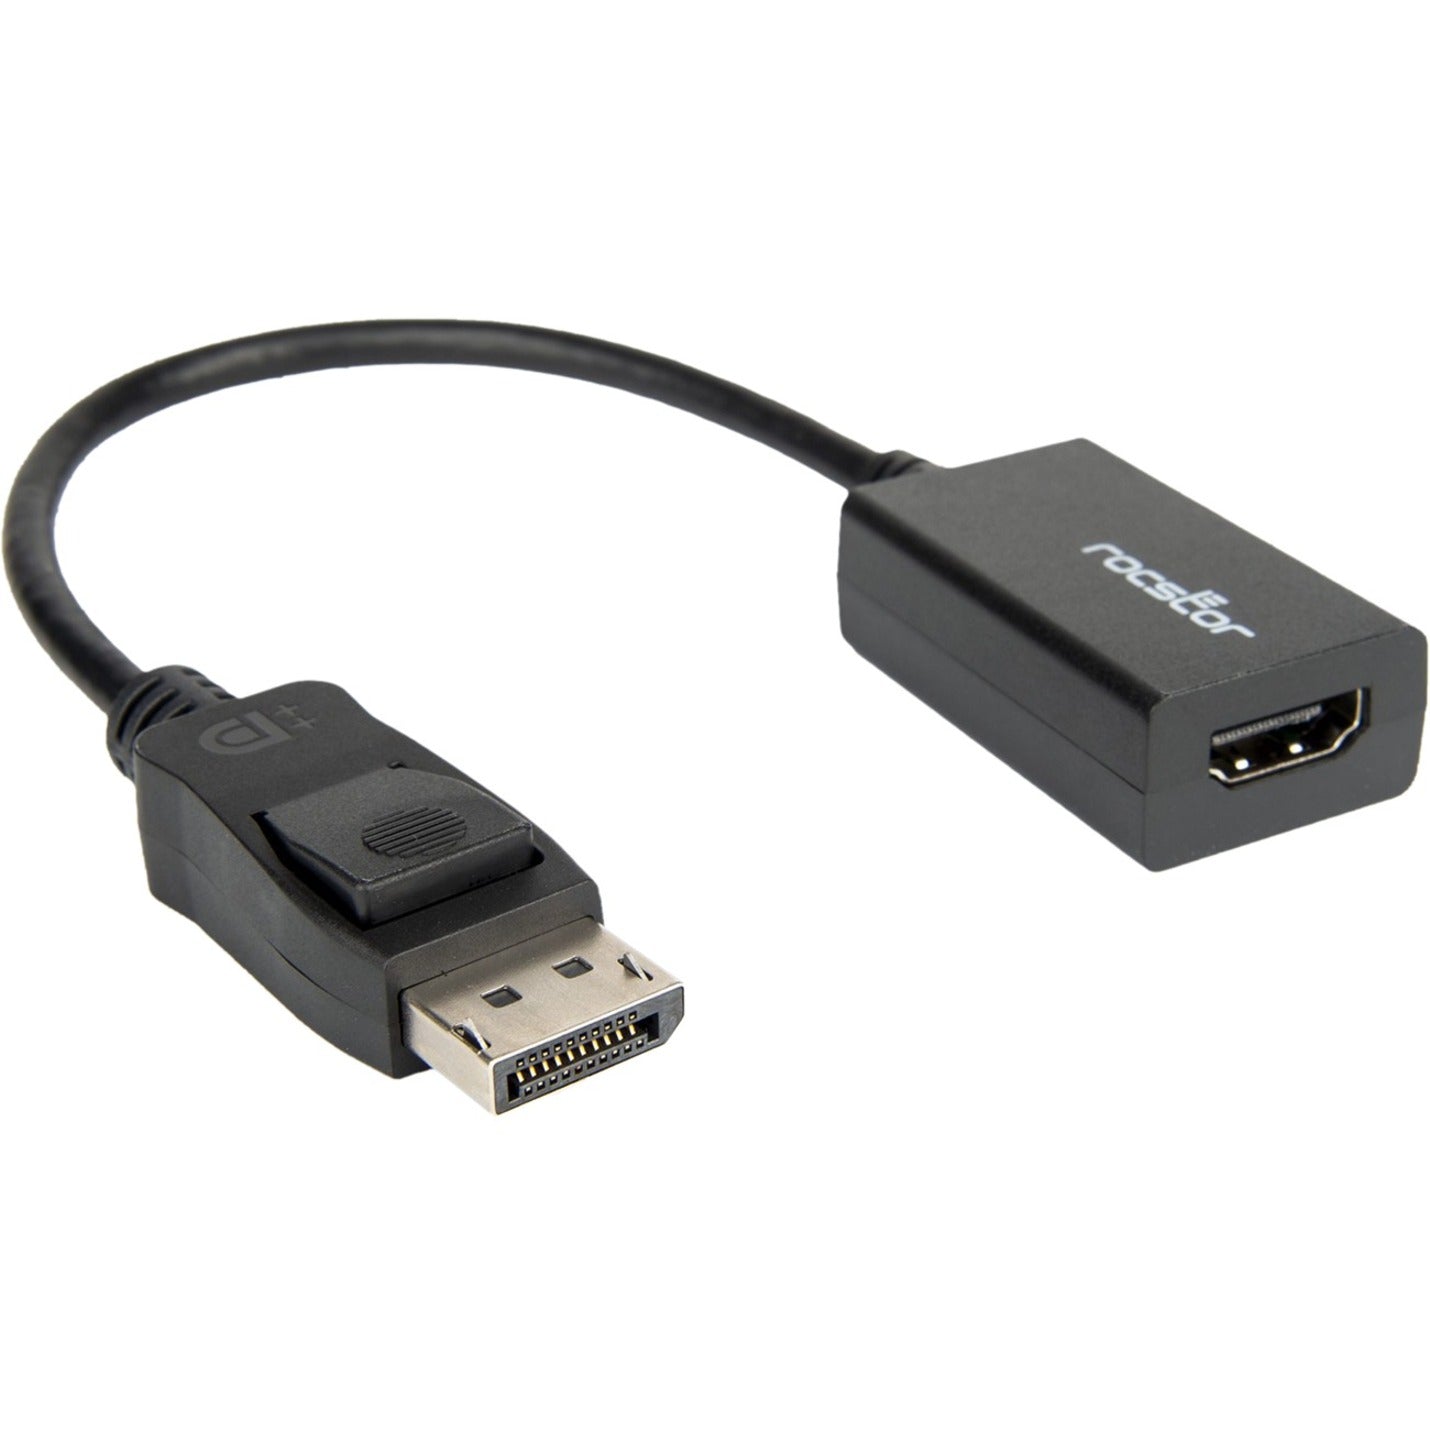 Rocstor Y10A101-B1 DisplayPort (male) to HDMI (female) Adapter Converter, 1920 x 1200 Resolution Supported